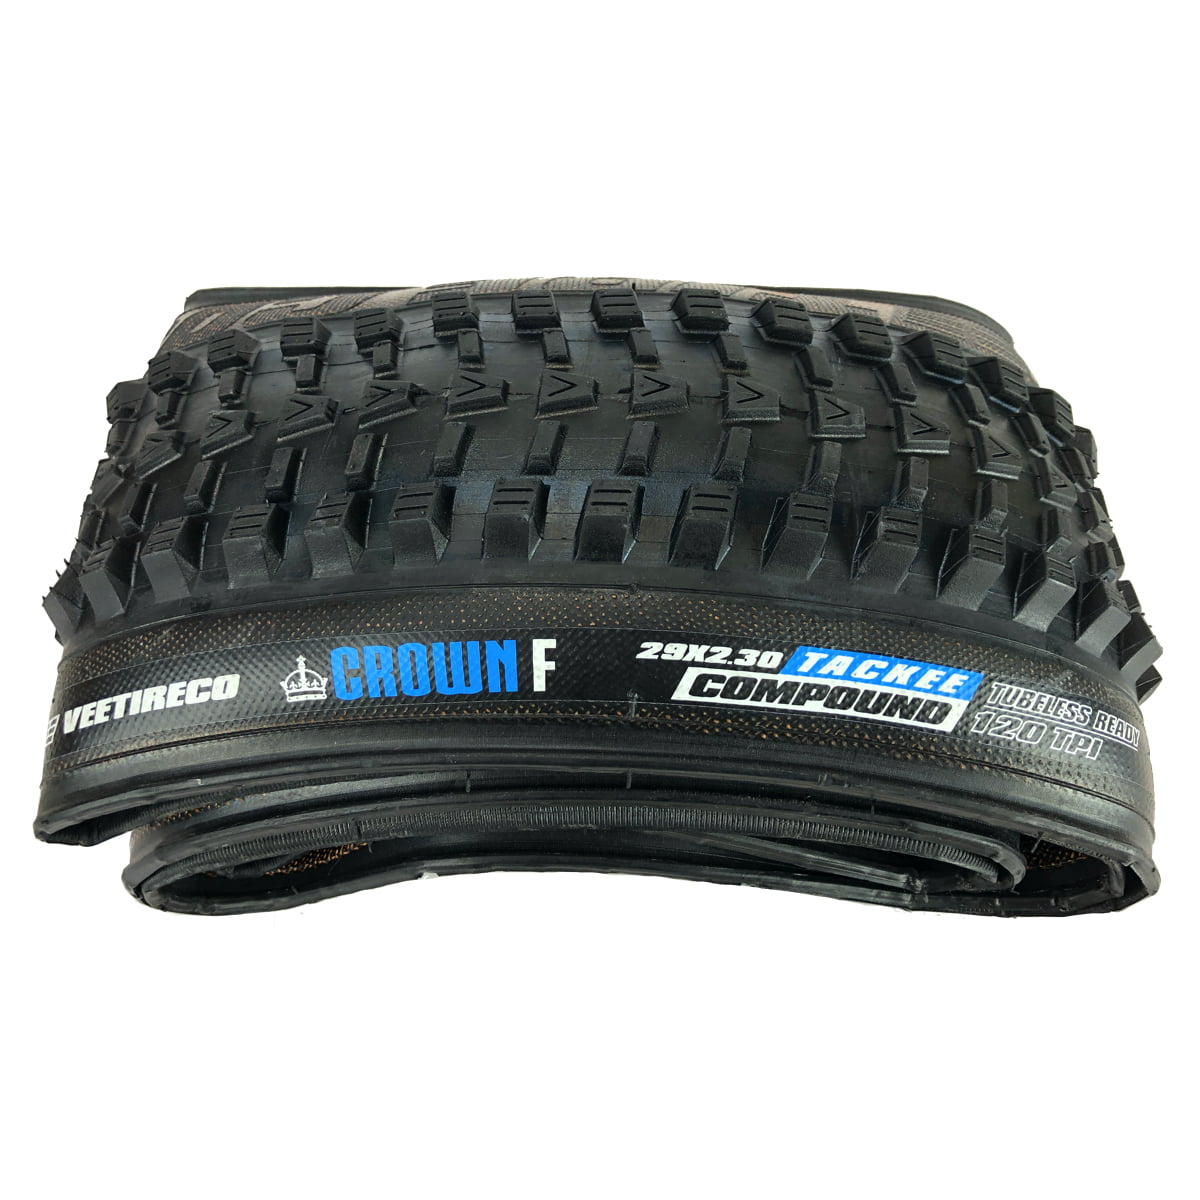 Vee Crown R 29" Folding Tyres 2.3" tackee 120tpi All Mountain Bike Tubeless 58-622 